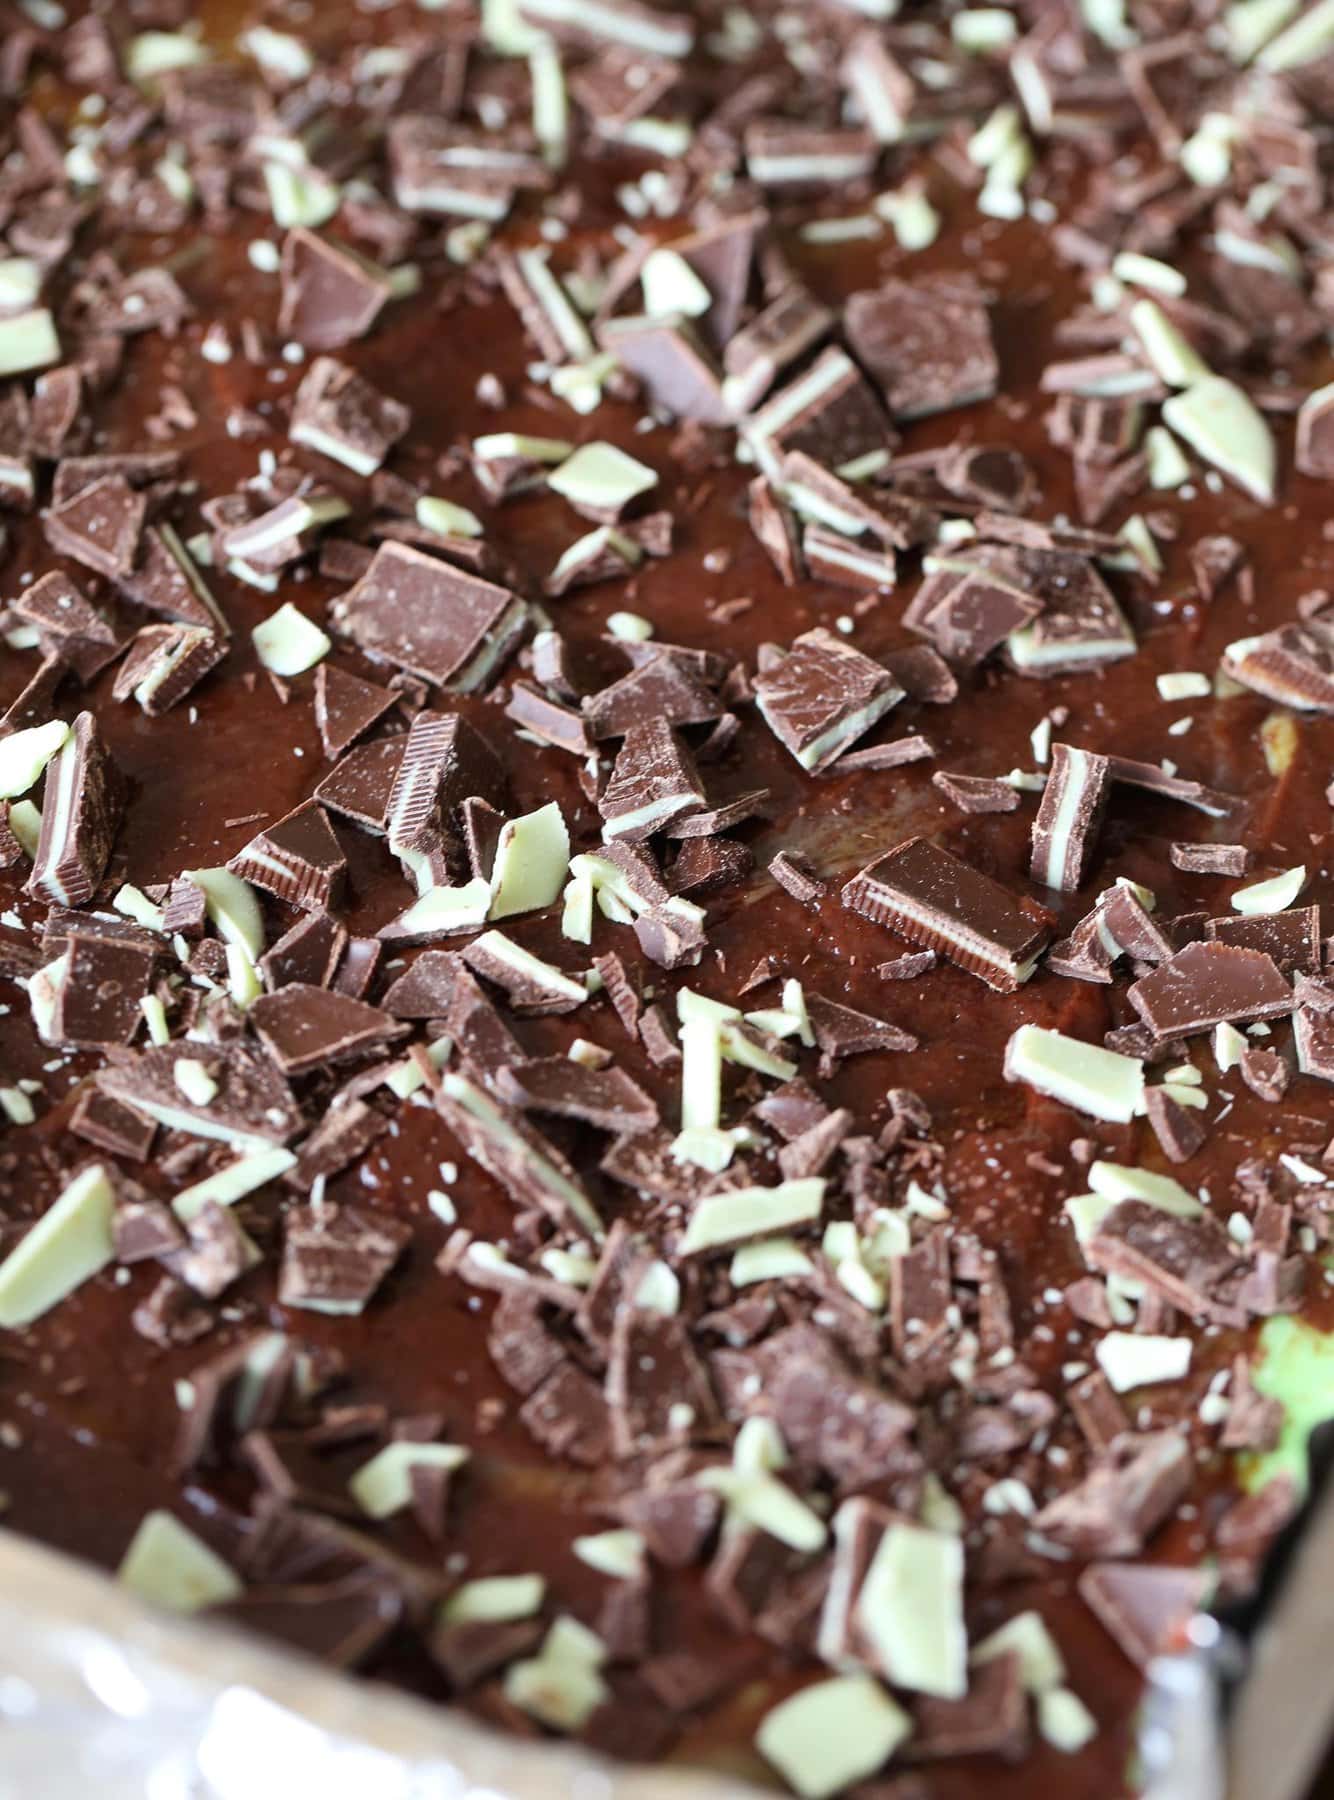 Andes mints chopped up into small pieces.